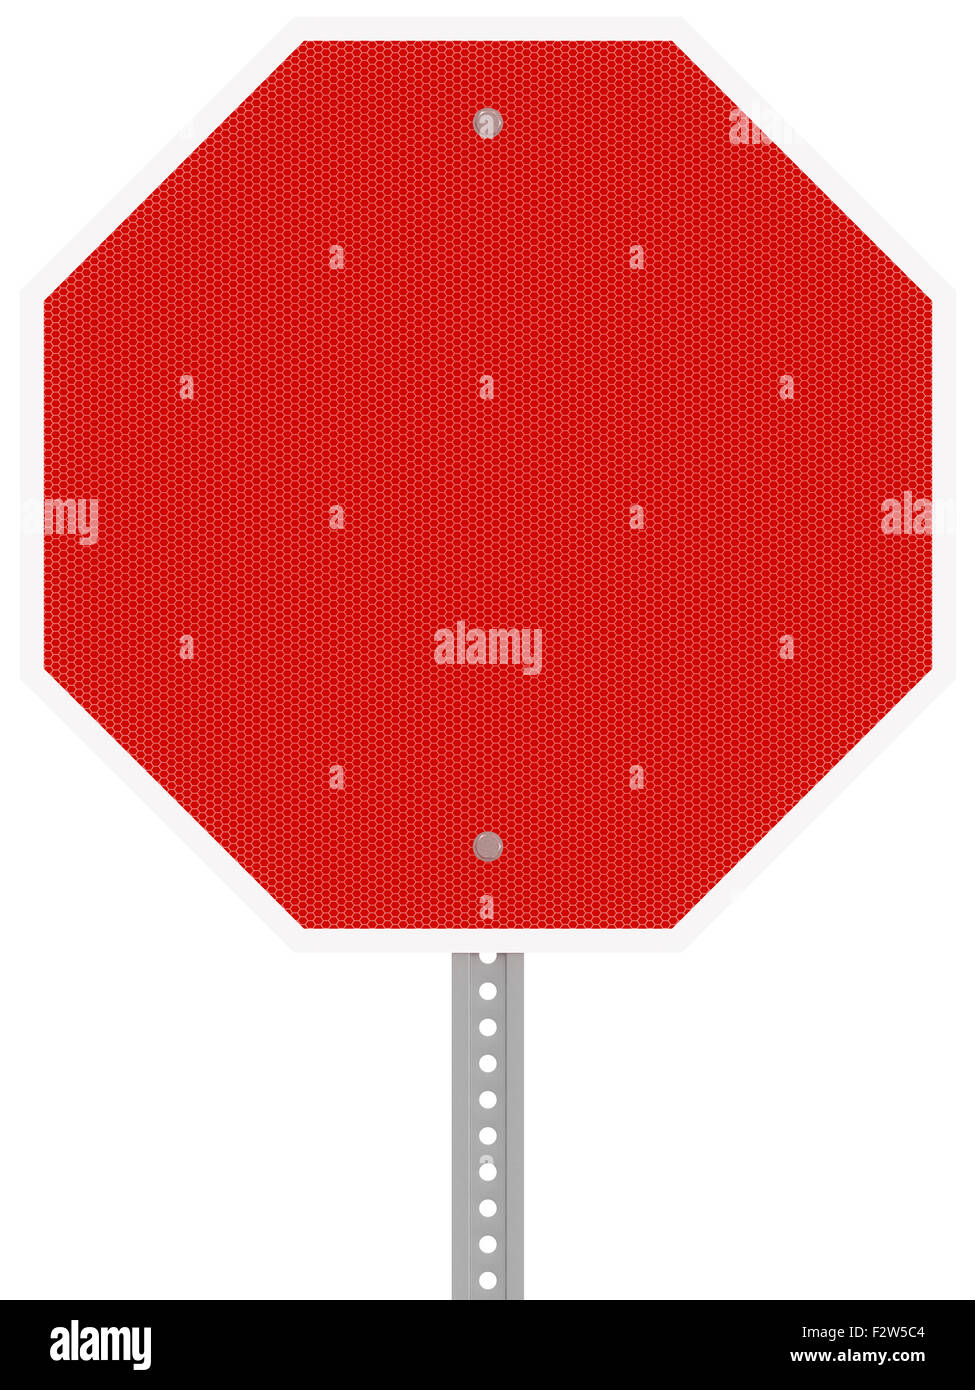 Red reflective hexagon stop sign isolated on a white background. Stock Photo